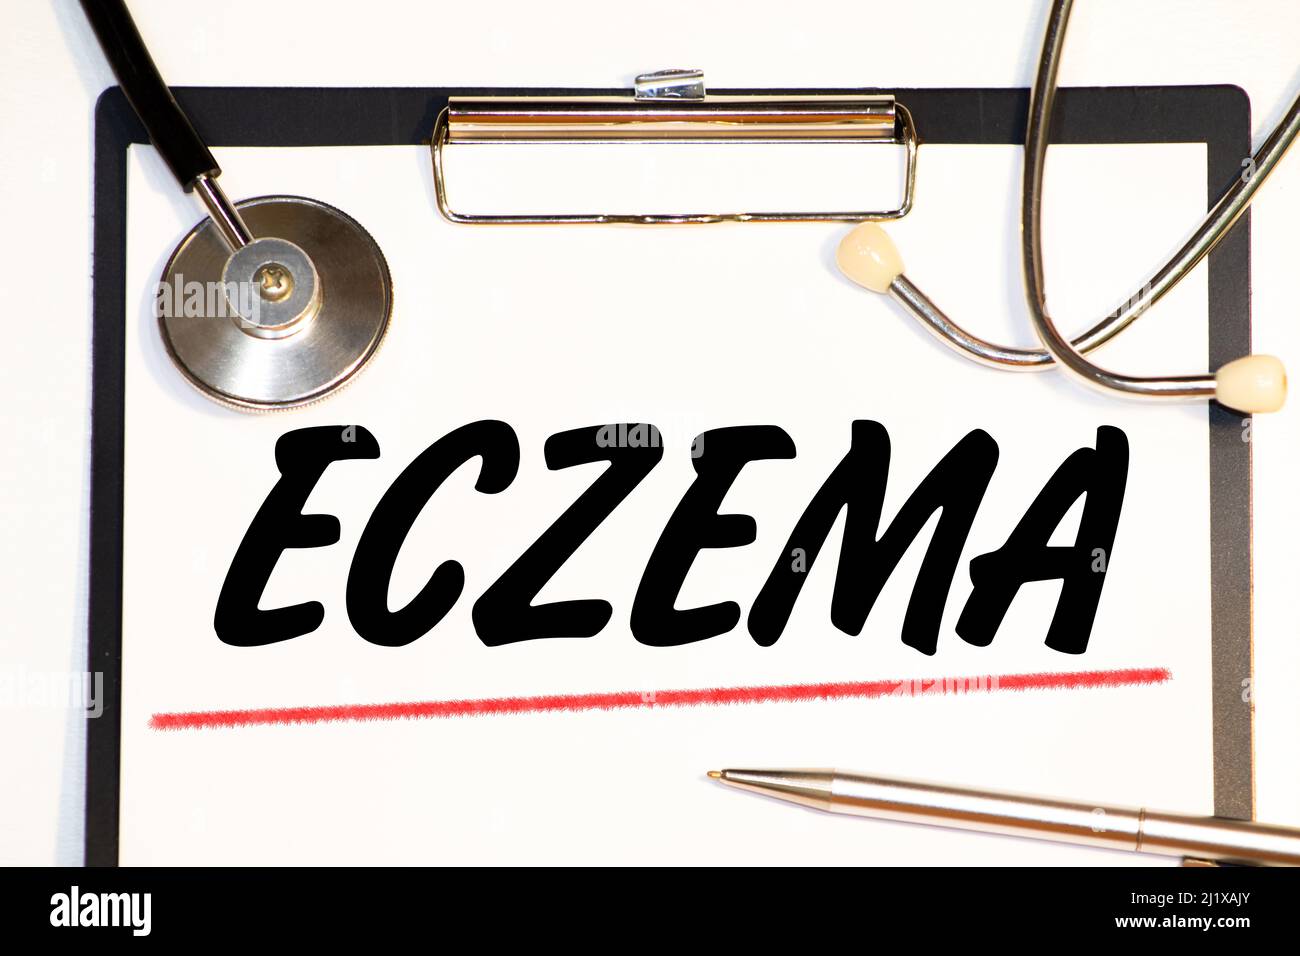 ECZEMA Top view, Doctor writing medical records on a clipboard, medical equipment. Stock Photo